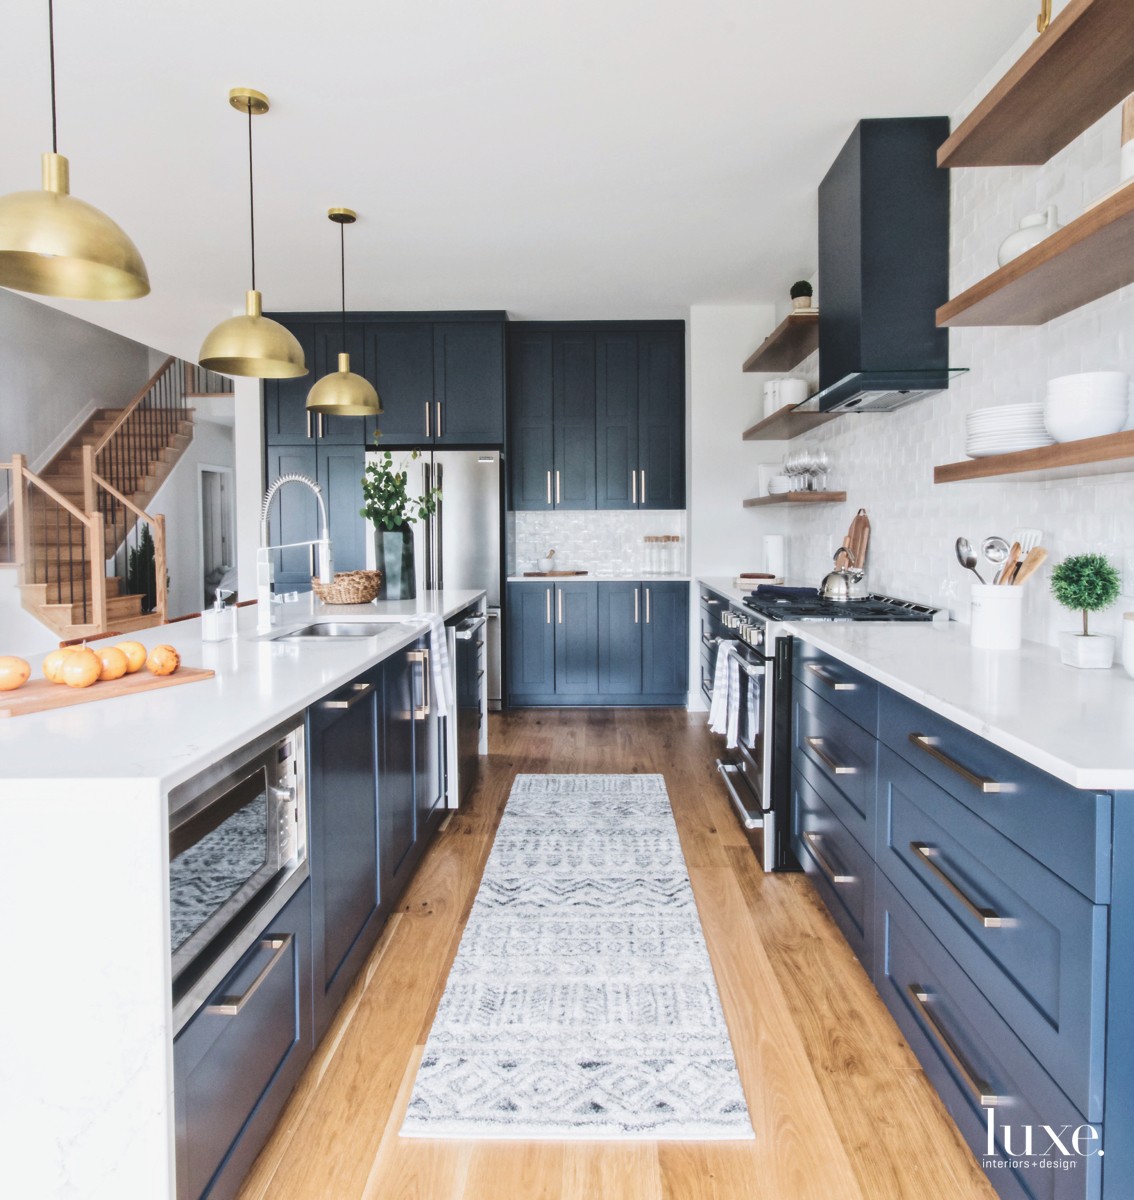 Designers Share How Color Can Make A Kitchen Pop - Luxe Interiors + Design